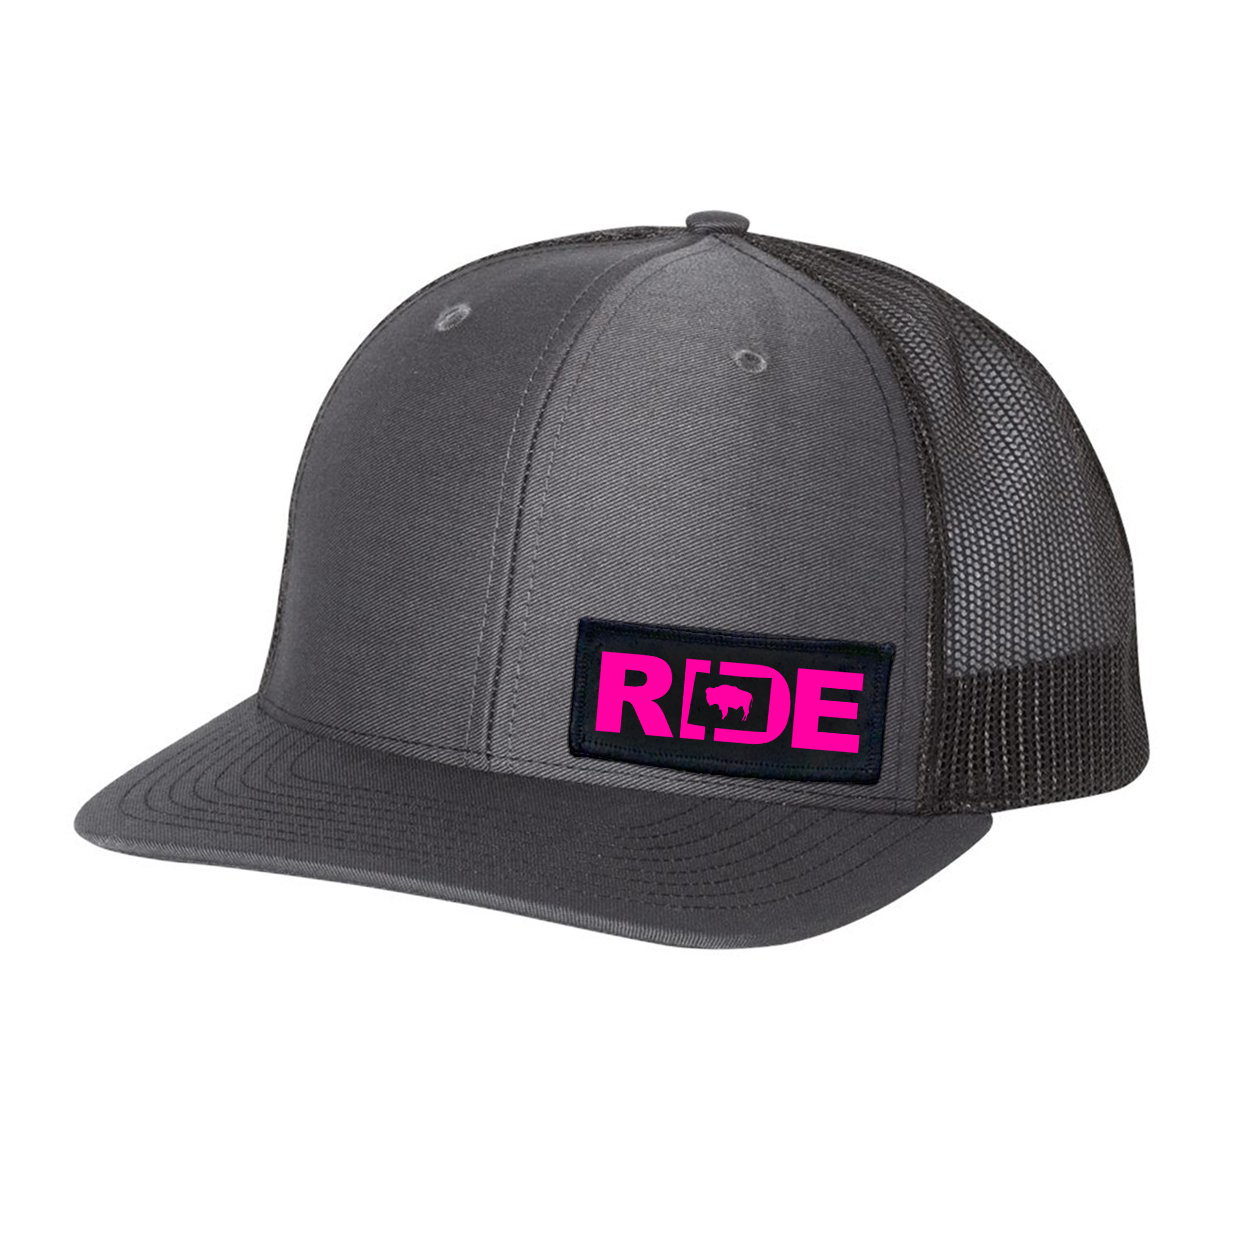 Ride Wyoming Night Out Woven Patch Flex-Fit Hat Dark Gray/Black (Pink Logo)